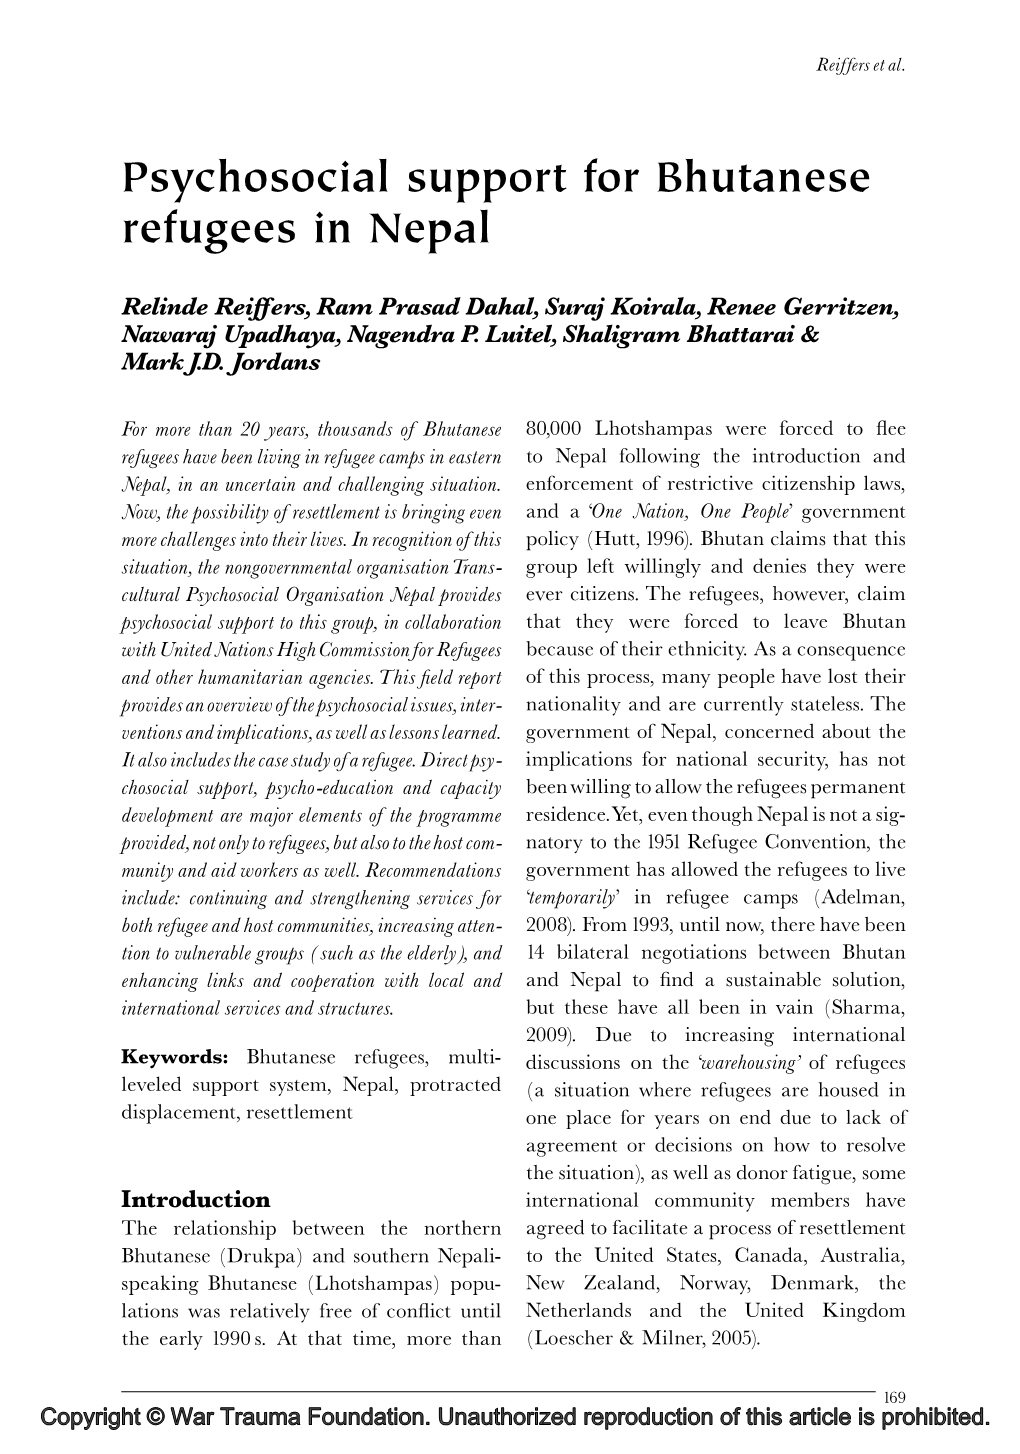 Psychosocial Support for Bhutanese Refugees in Nepal